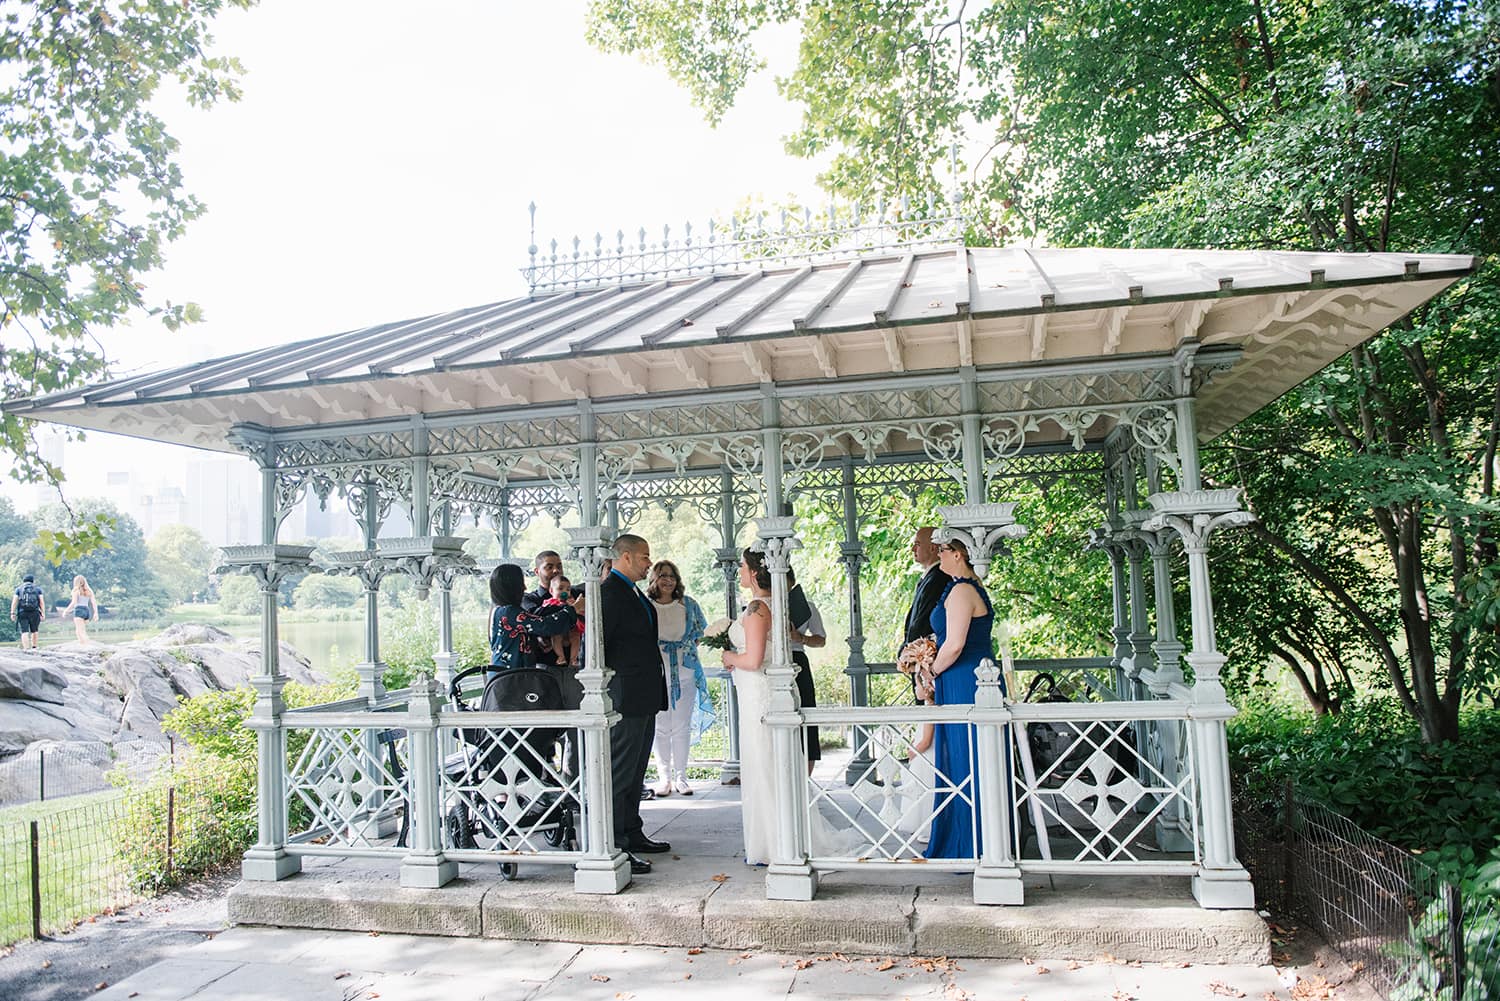 Places to Elope in NYC: Ladies Pavilion wedding in Central Park, NYC